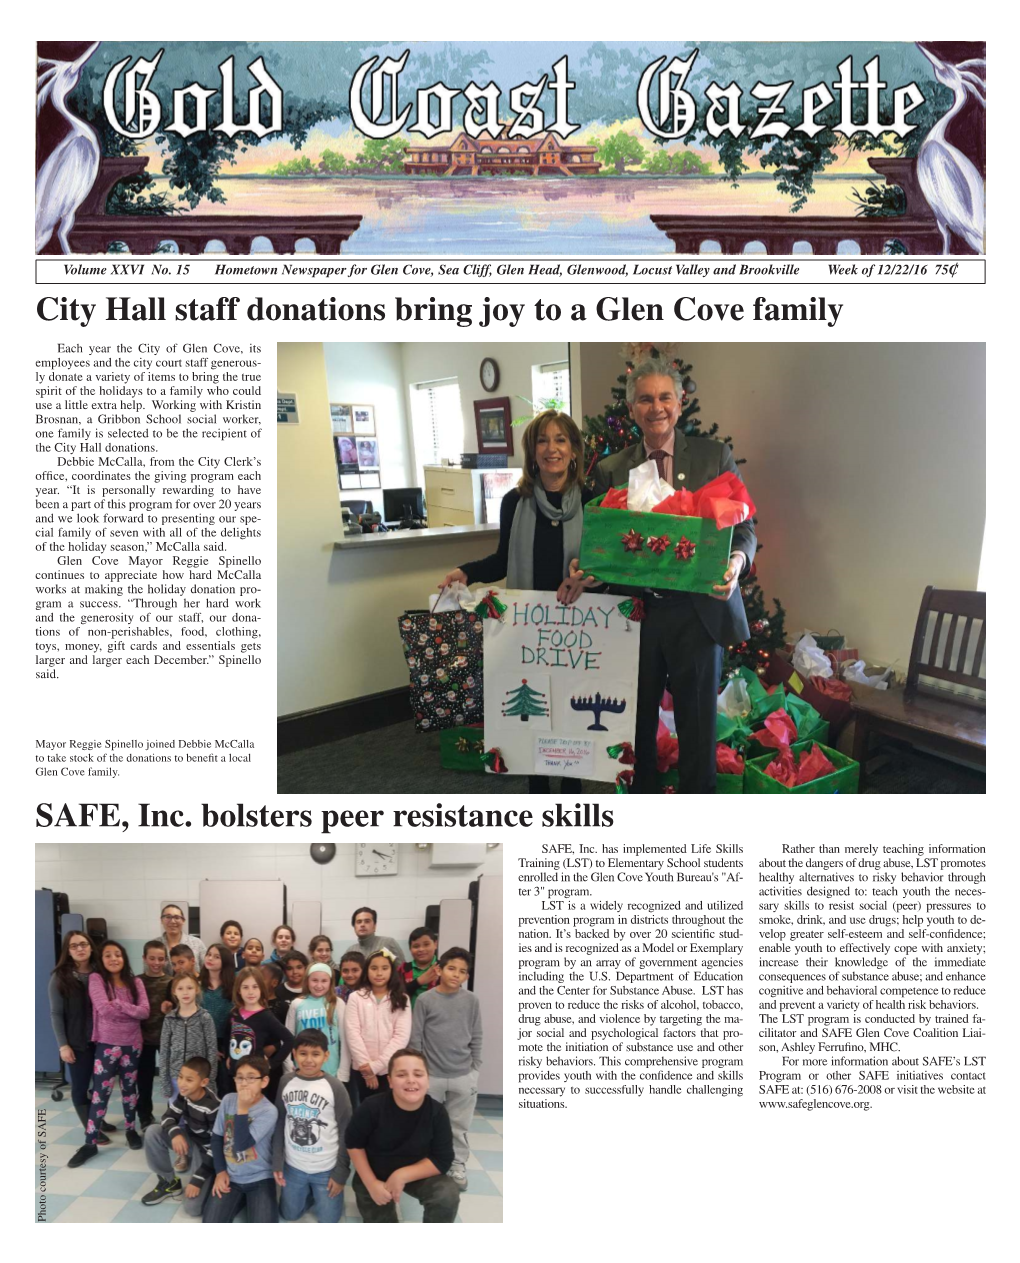 City Hall Staff Donations Bring Joy to a Glen Cove Family SAFE, Inc. Bolsters Peer Resistance Skills